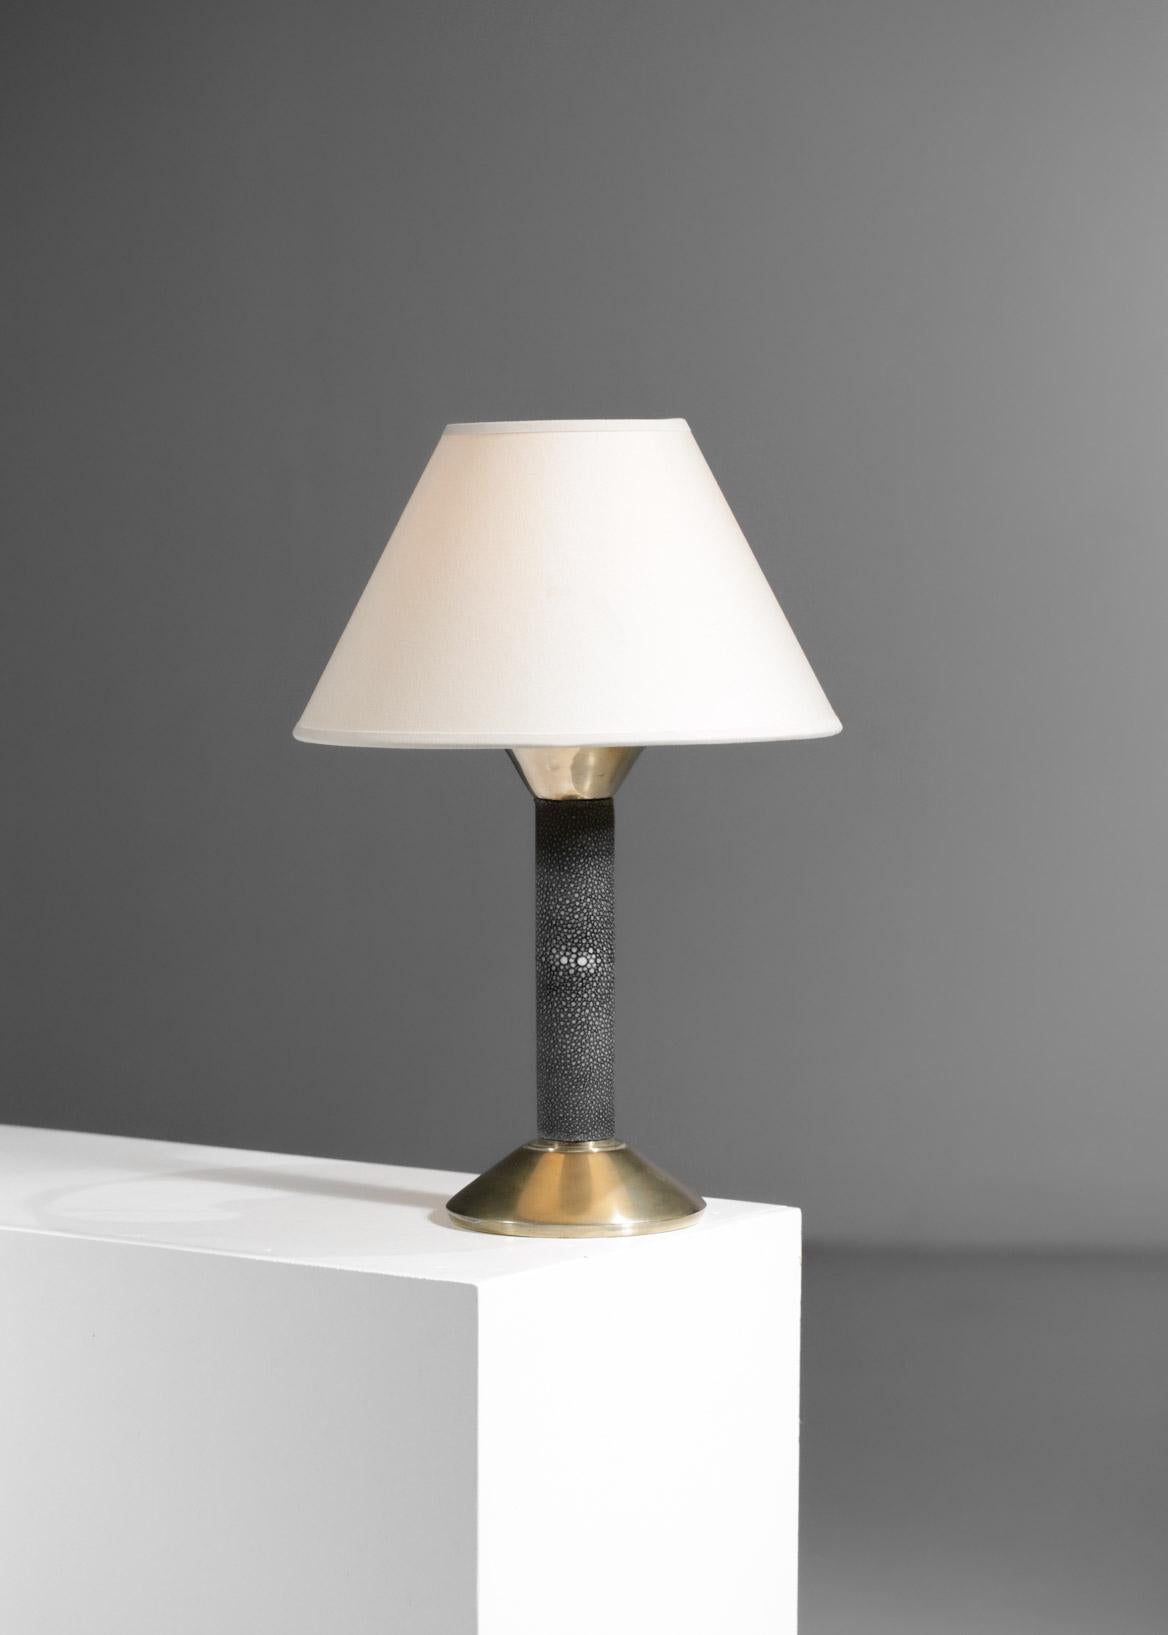 Mid-20th Century Art Deco Table Lamp in Stingray Attributed to André Groult Bronze 1940s - G082 For Sale